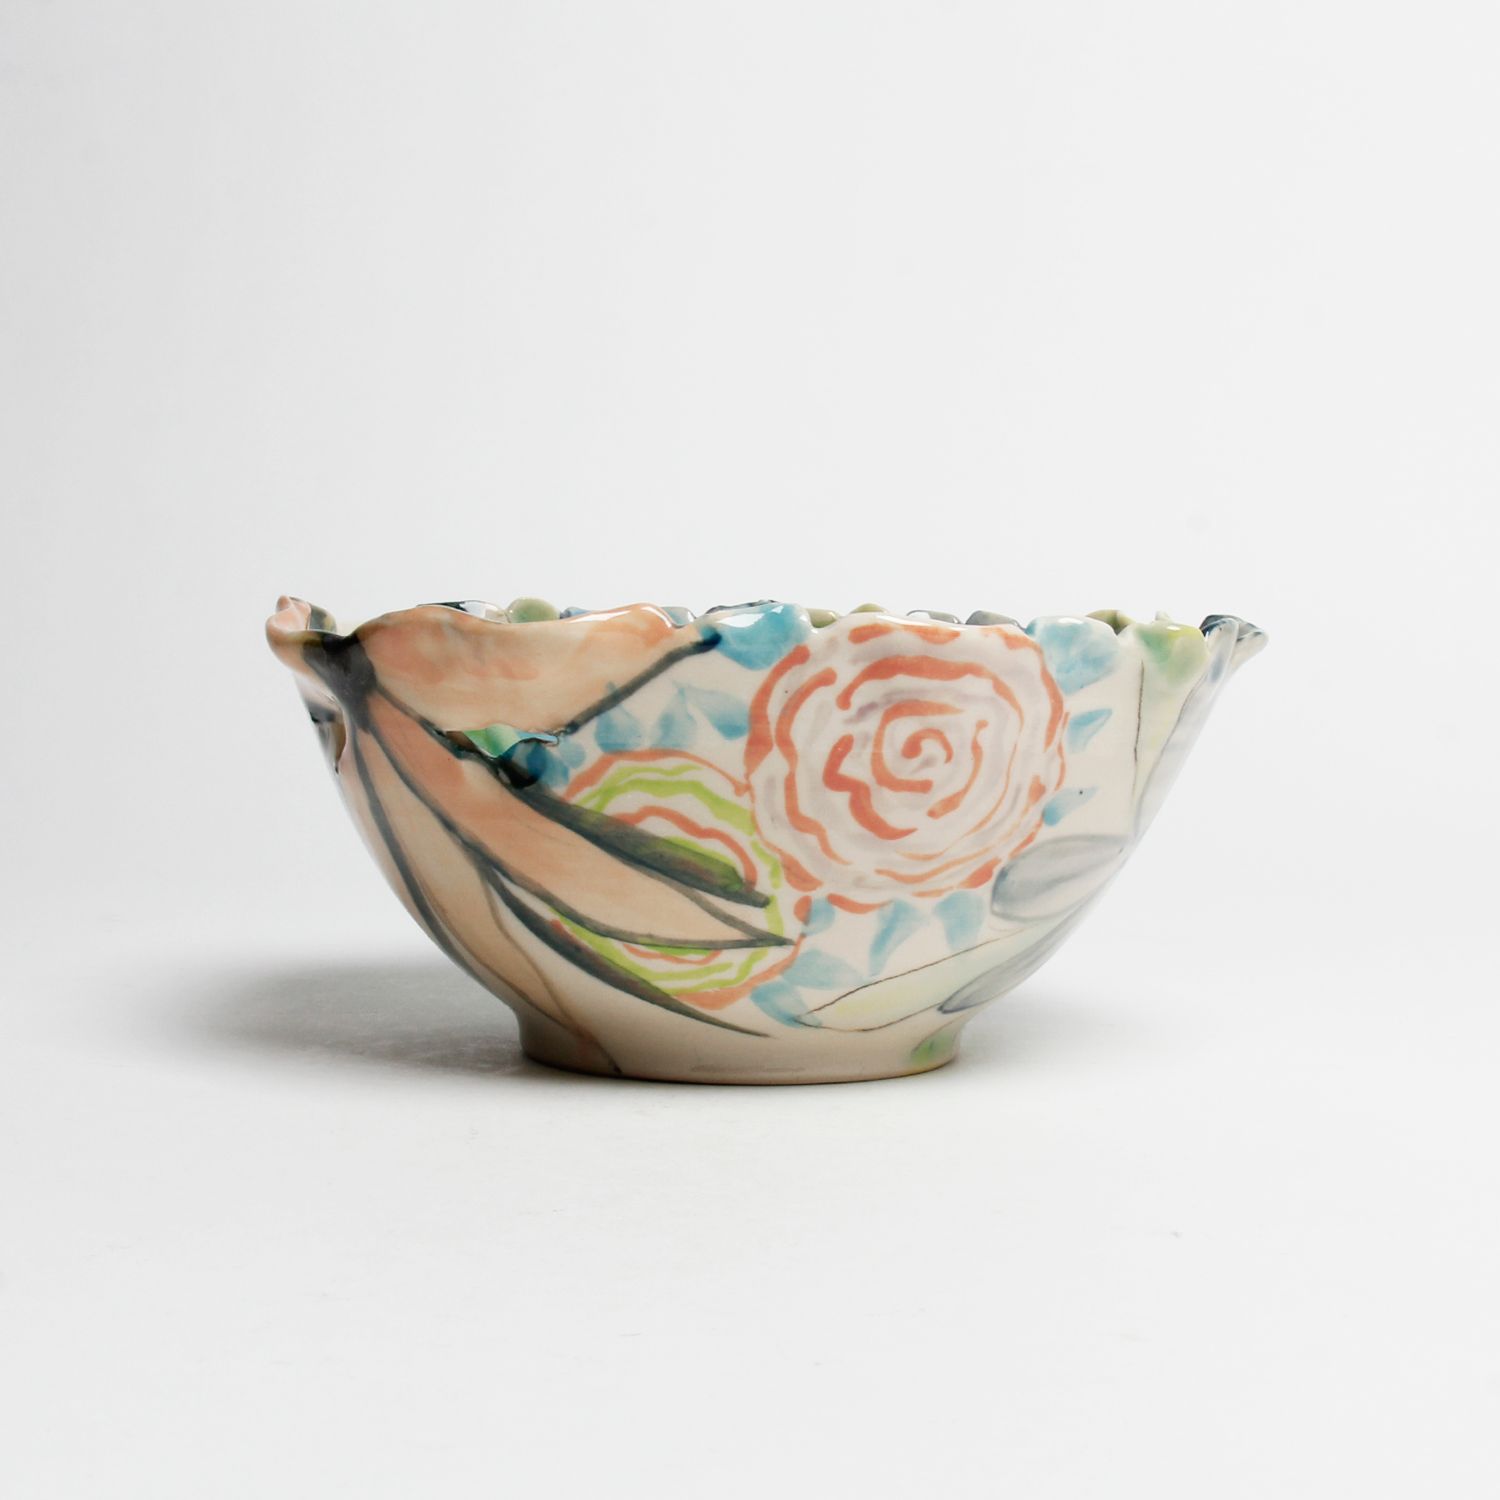 Susan Card: Floral Bowl 1 Product Image 4 of 4